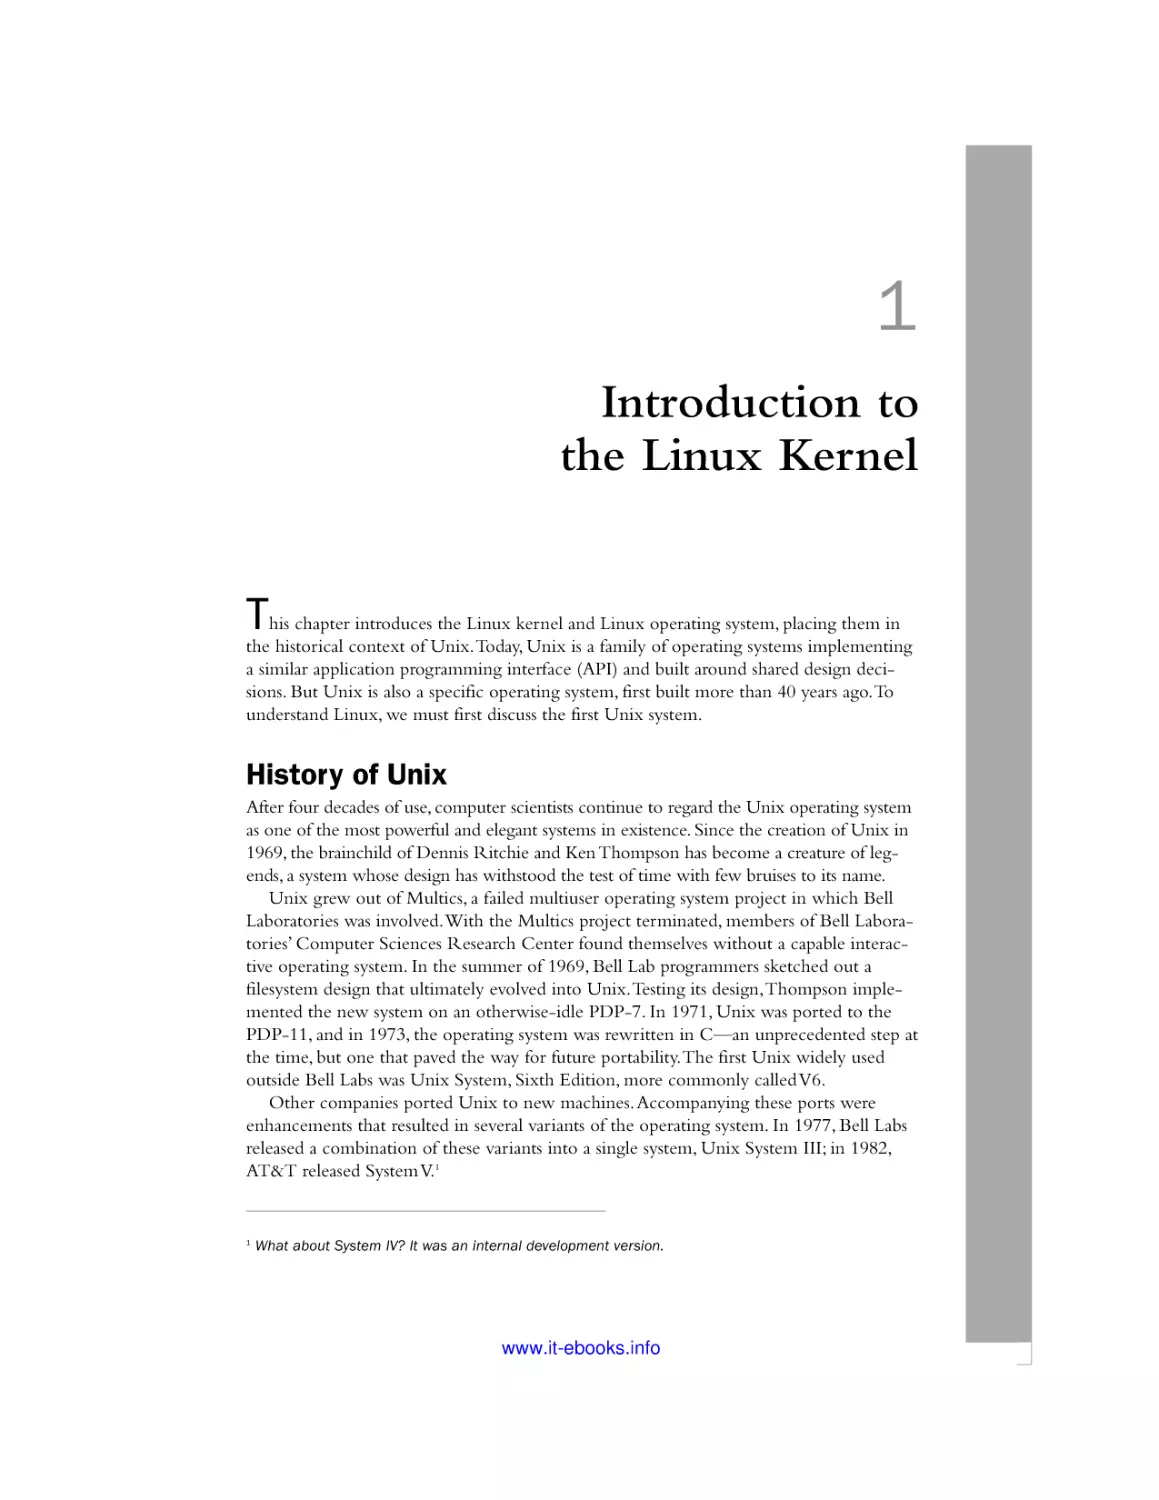 1 Introduction to the Linux Kernel
History of Unix